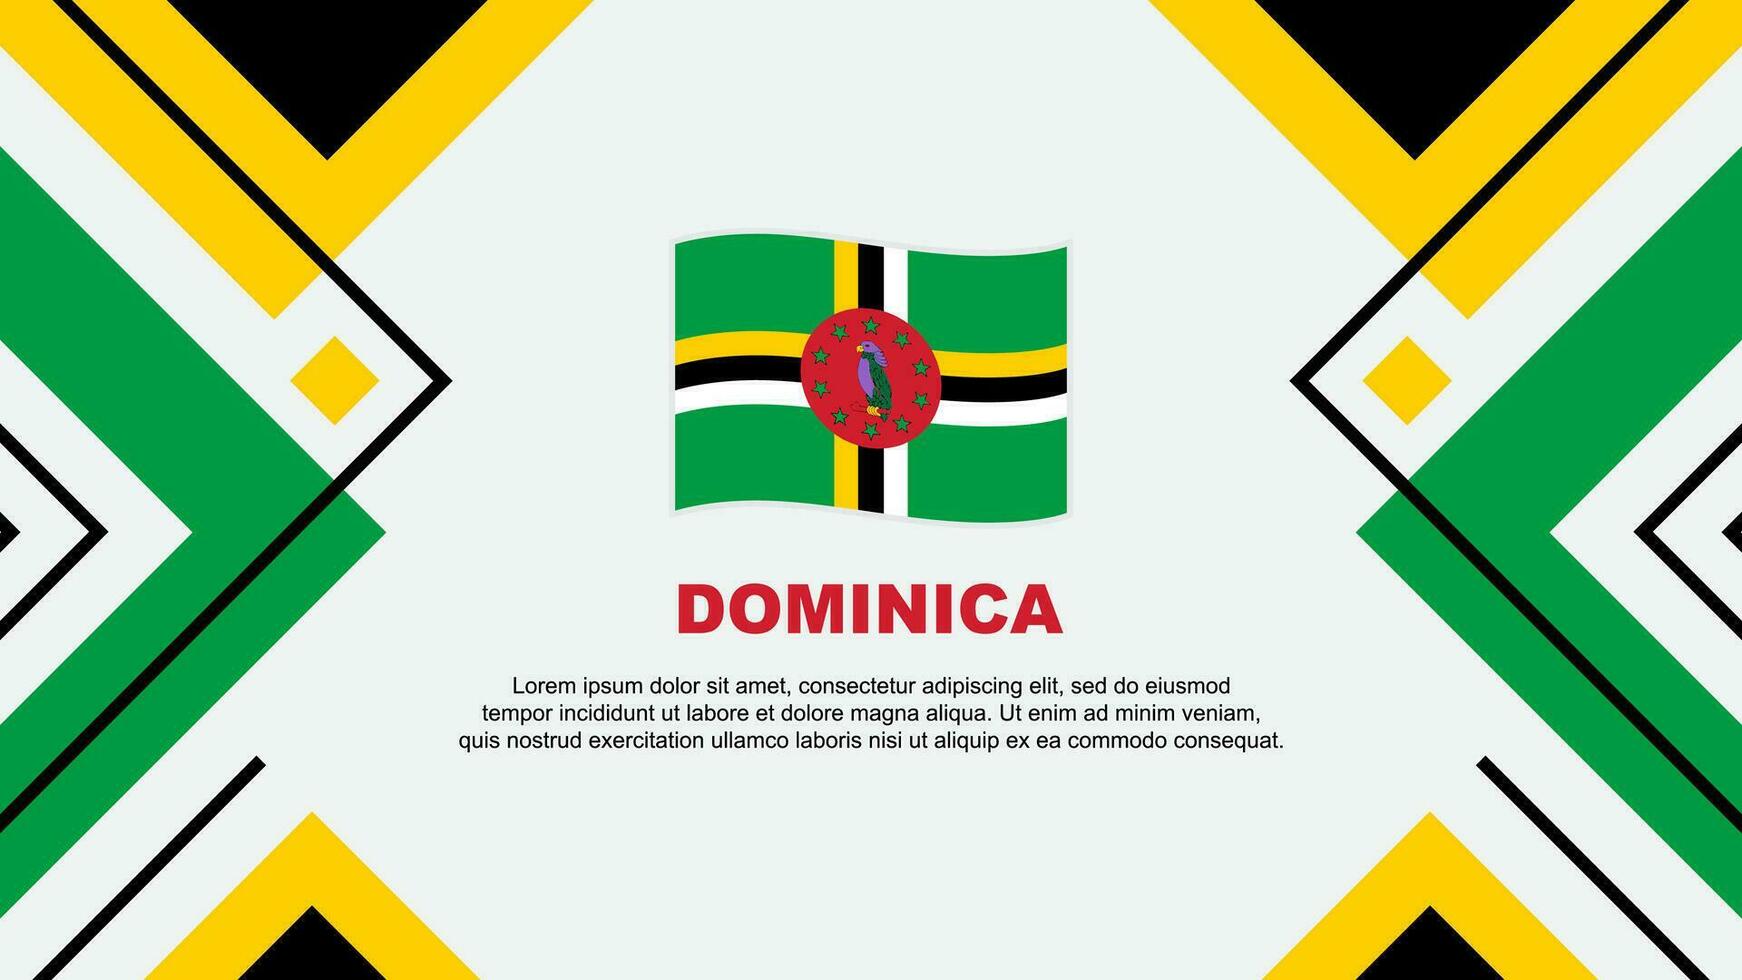 Dominica Flag Abstract Background Design Template. Dominica Independence Day Banner Wallpaper Vector Illustration. Dominica Illustration